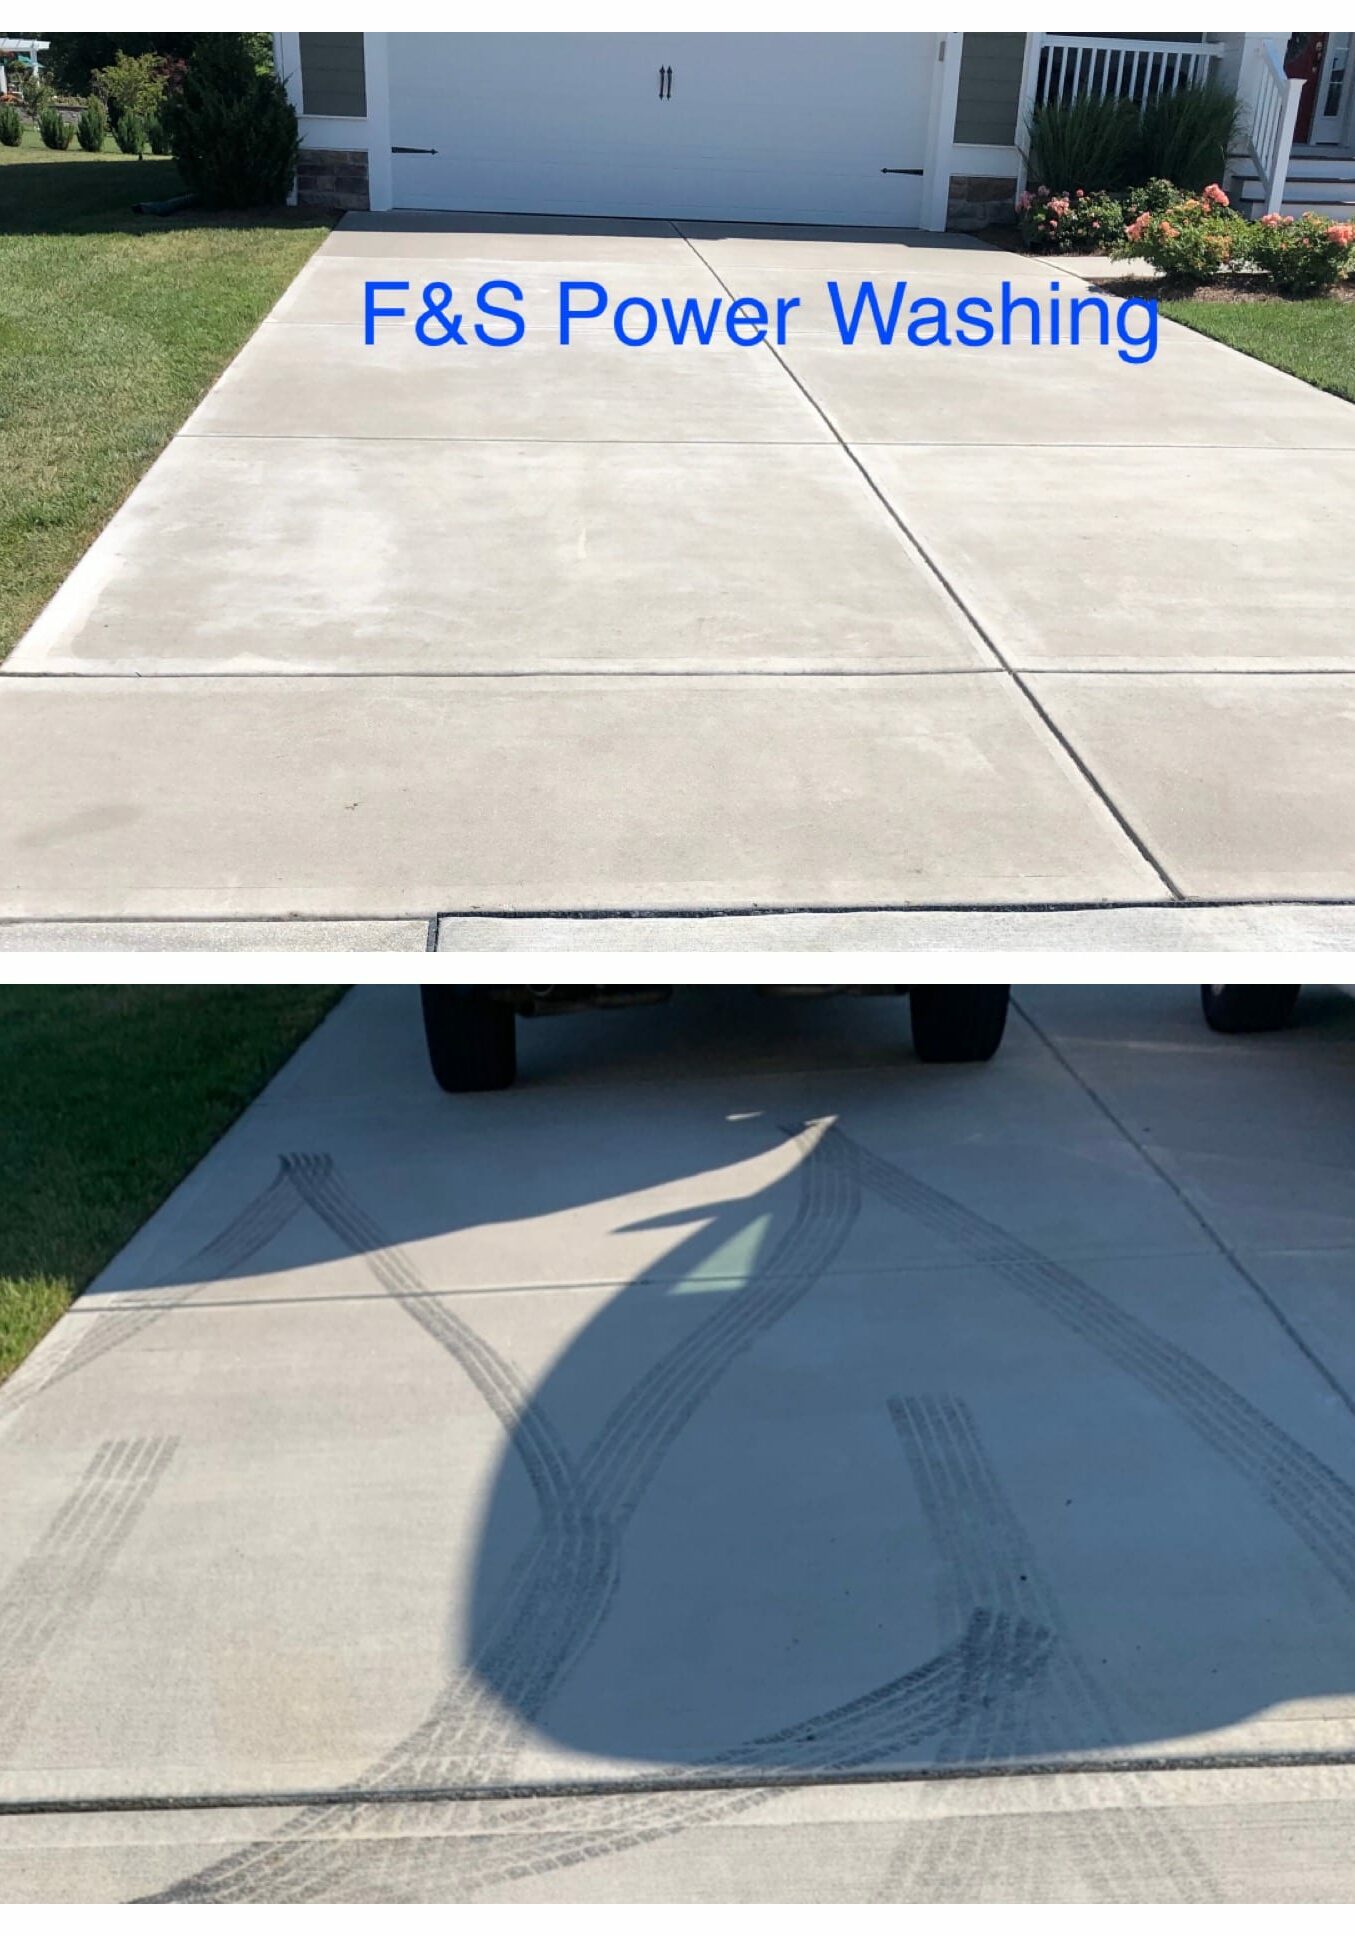 Our walkway power washing services allow you to show off your perfect home--dirt free. We offer a variety of packages that are individually suited for you and your family so that you can have the spotless home you've always dreamed of. Our walkway power washing services encompass concrete, pavers, and brick walkways.